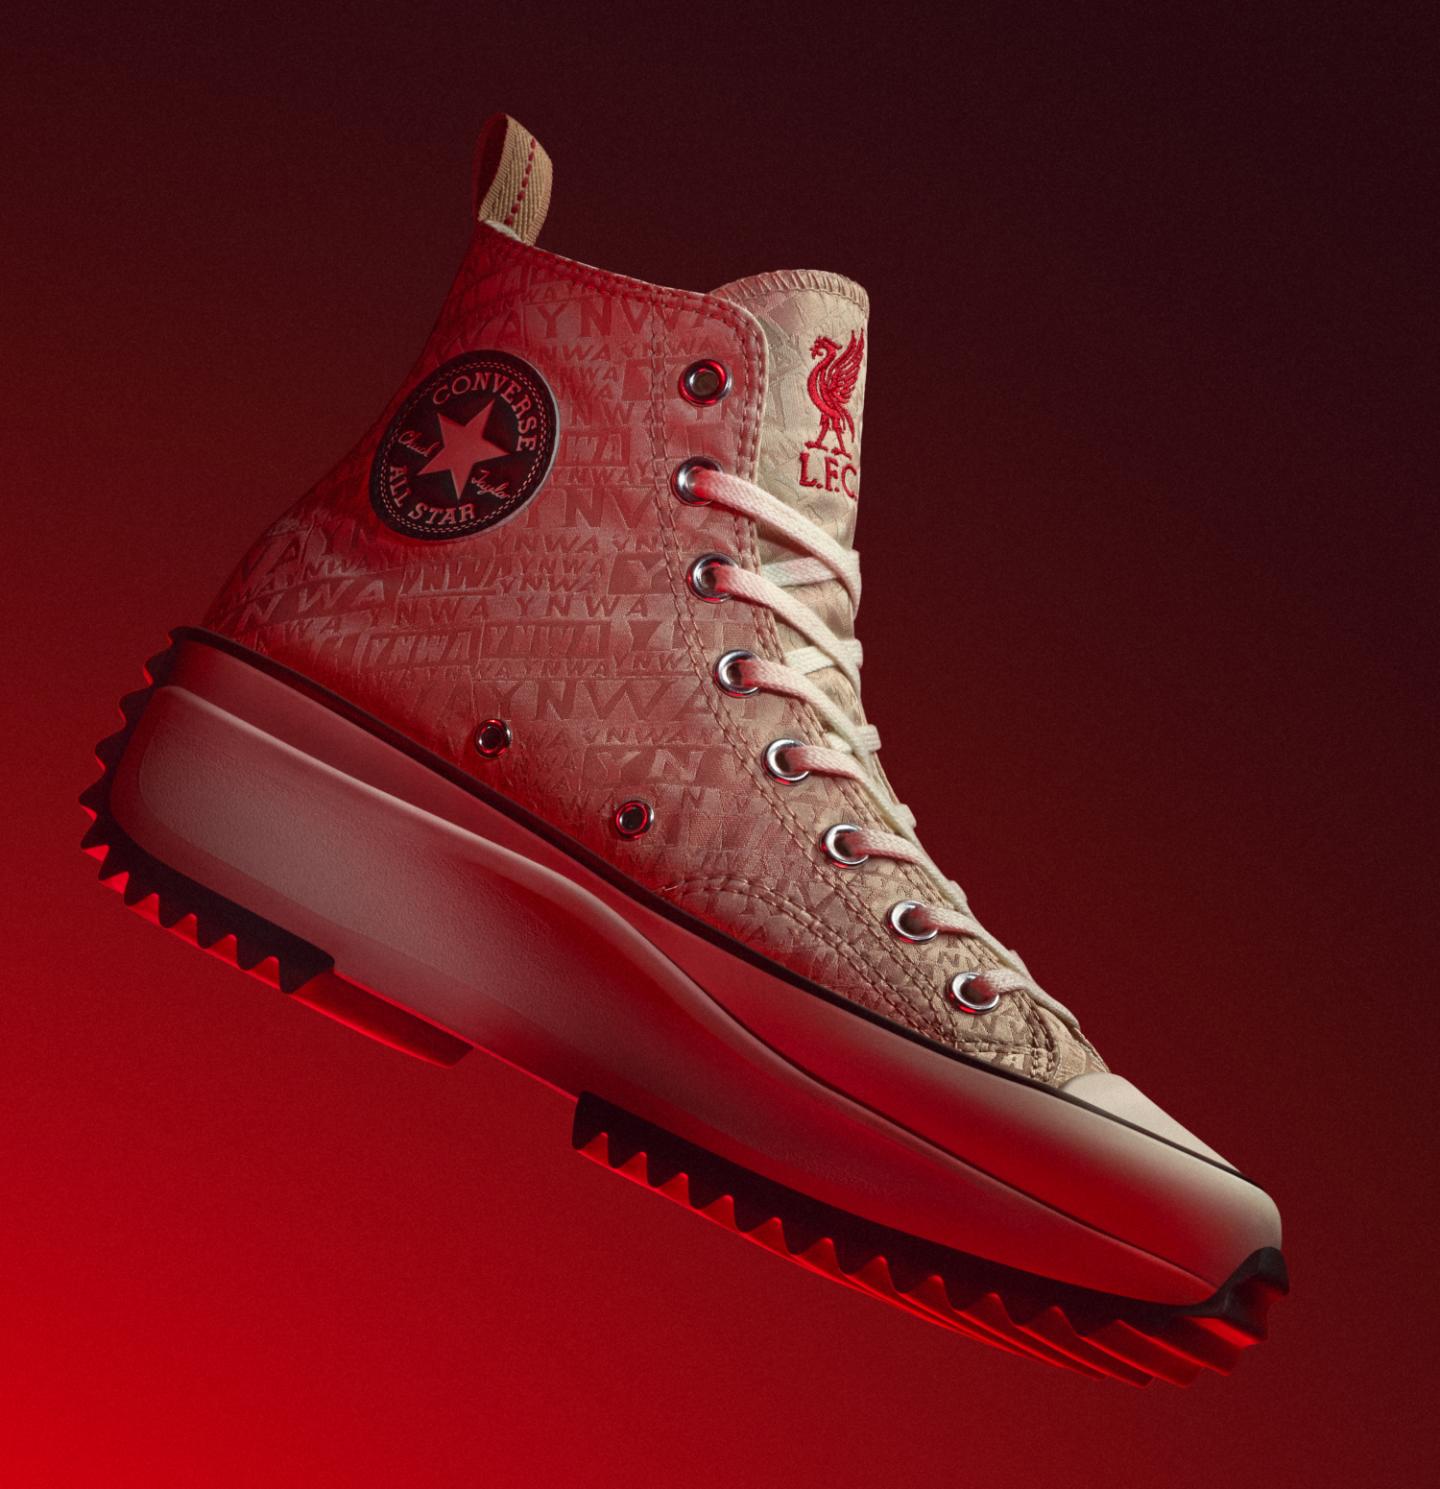 Out now: New LFC and Converse limited-edition capsule collection